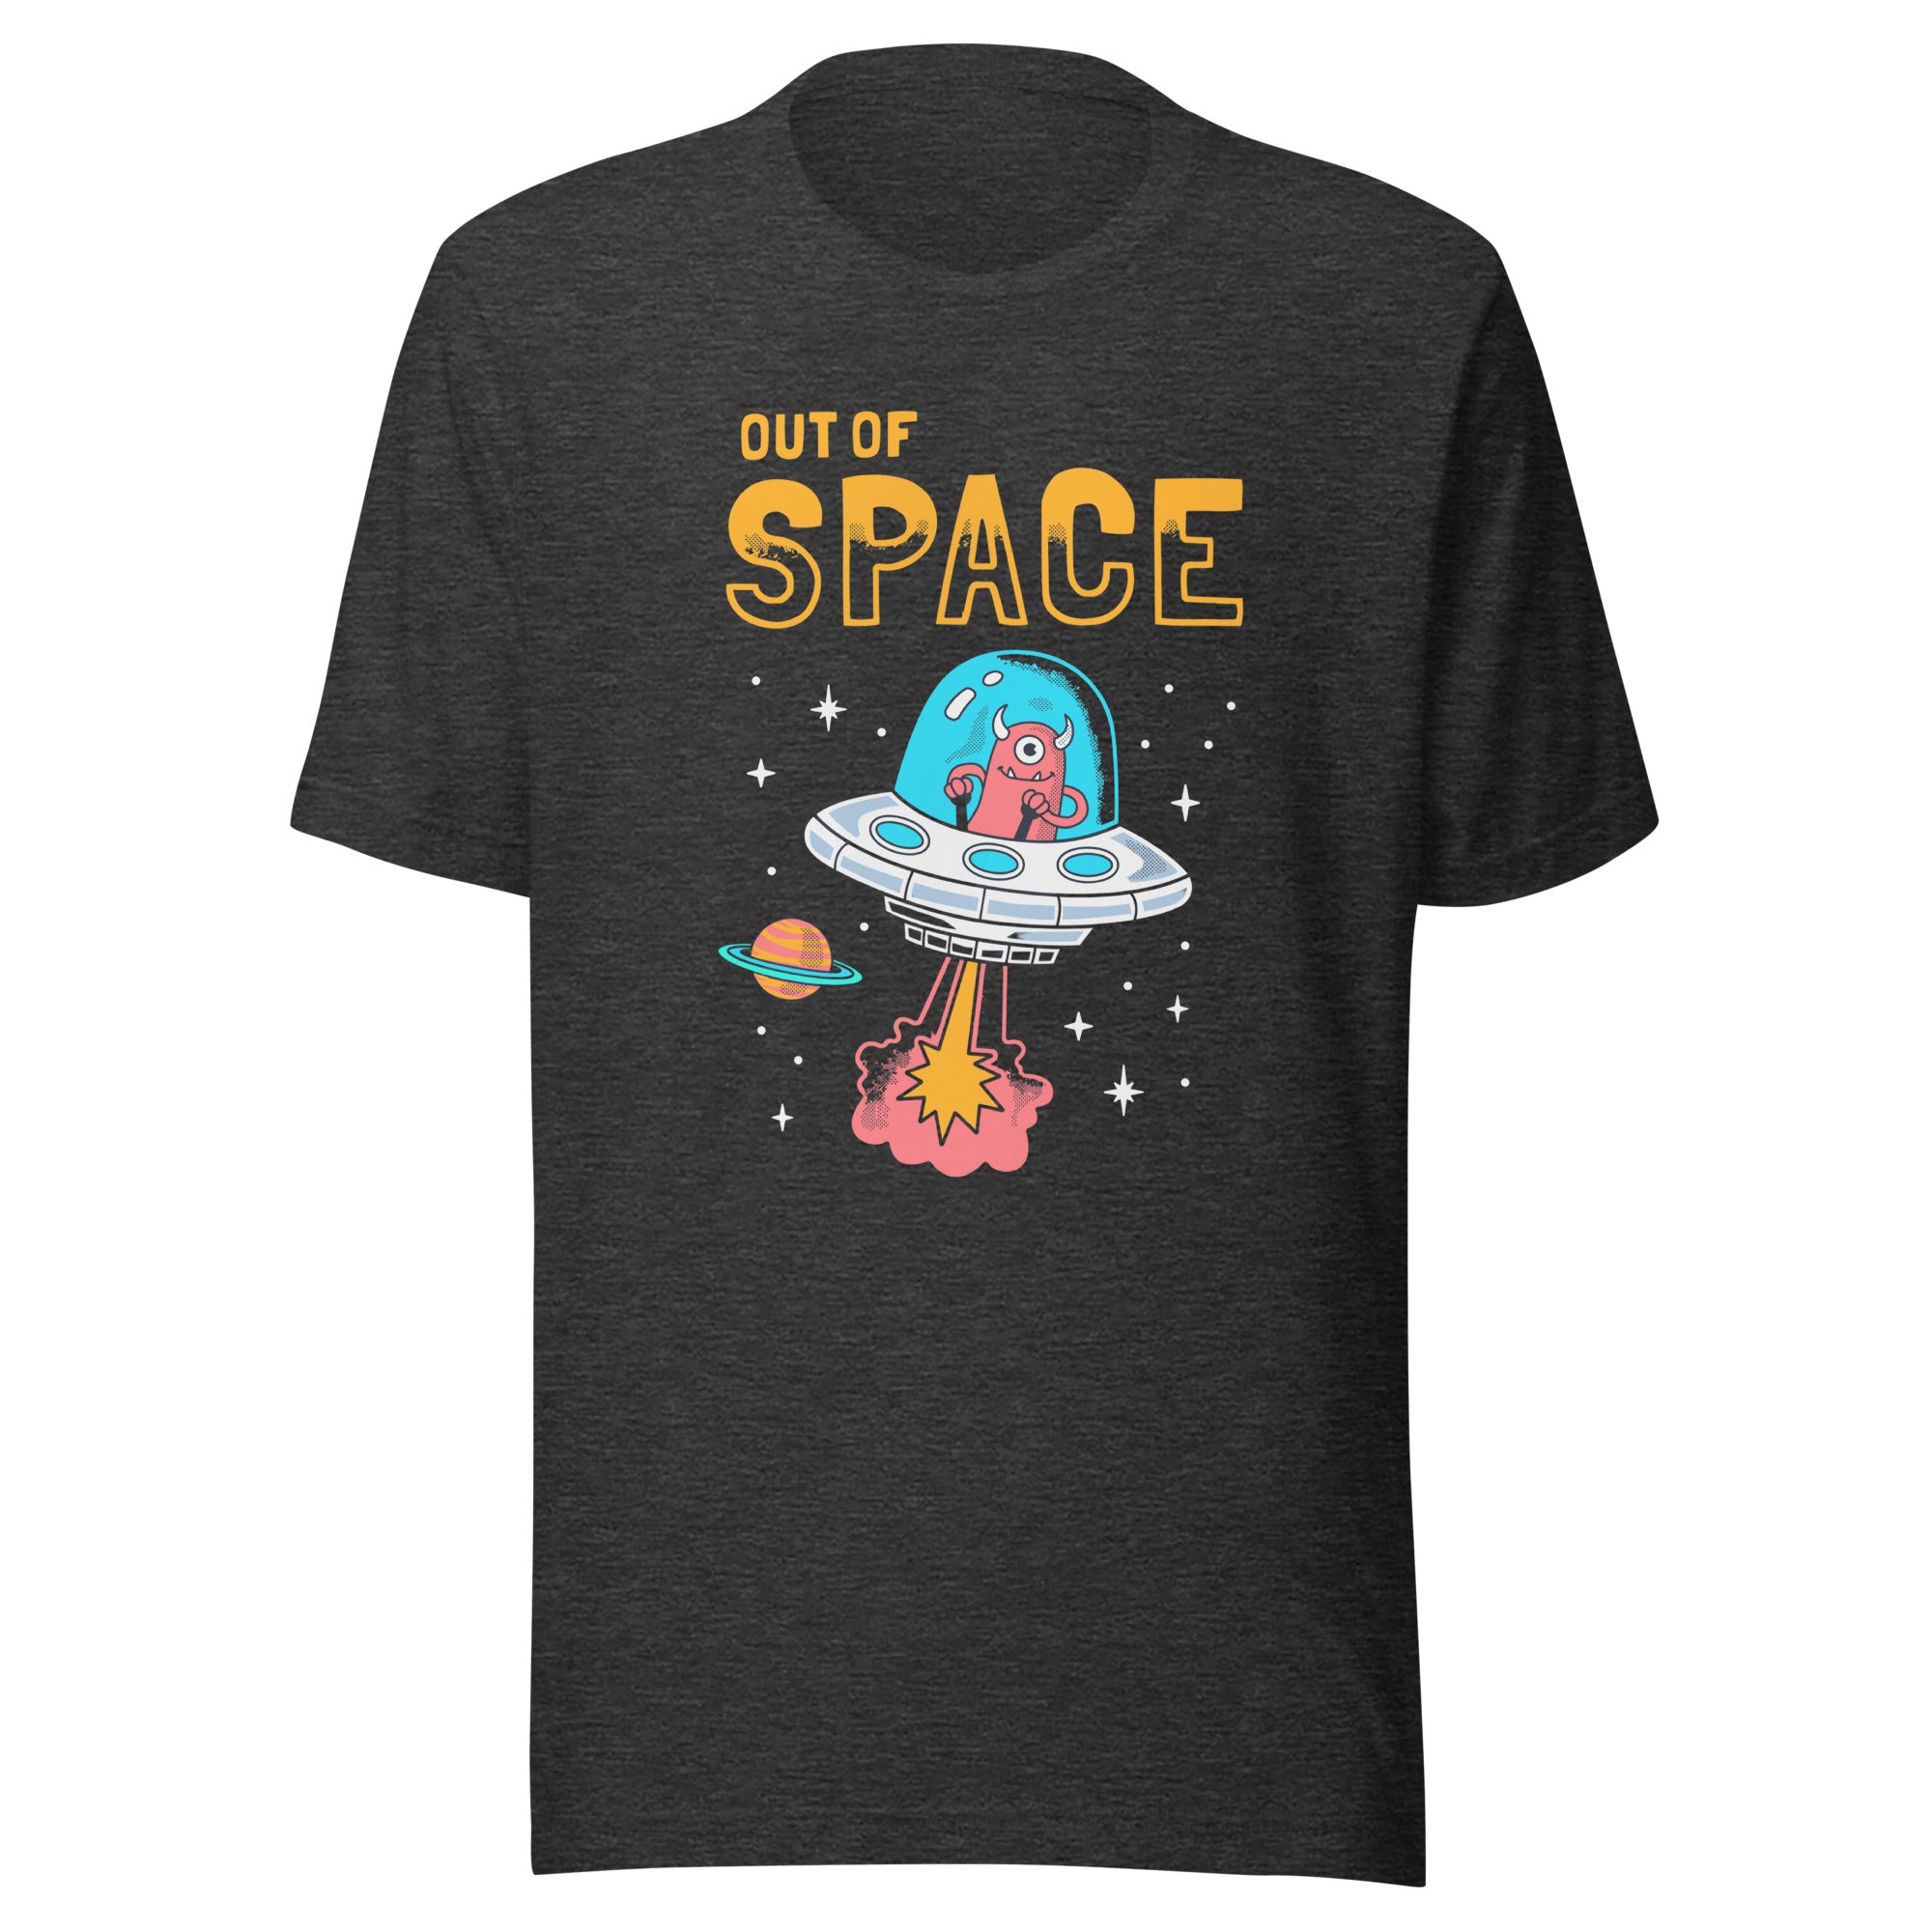 Space for women